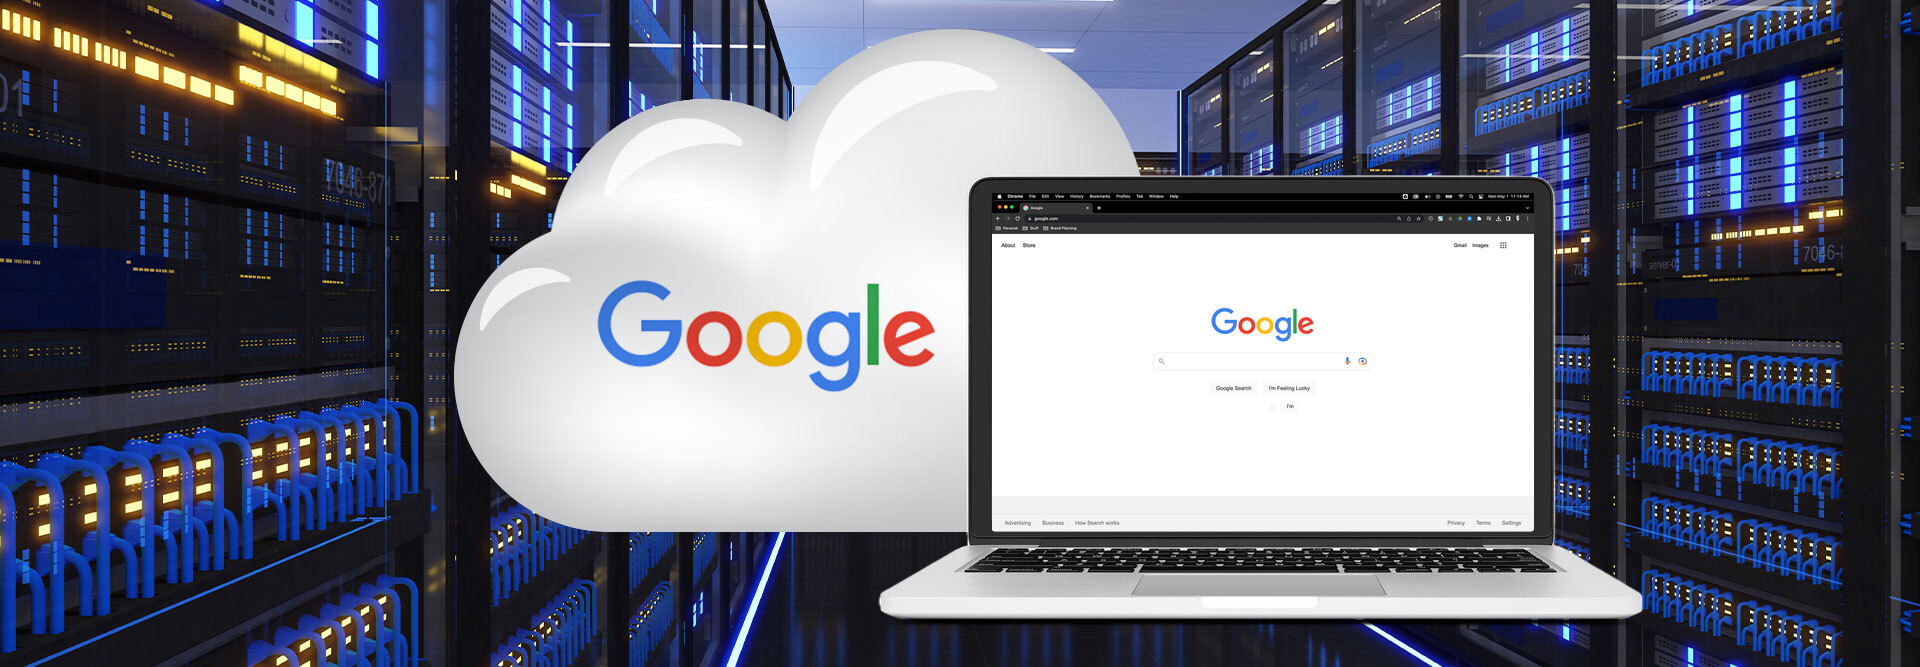 A cloud graphic with the Google logo floating beside a laptop with the Google search bar displayed in front of a web server room.